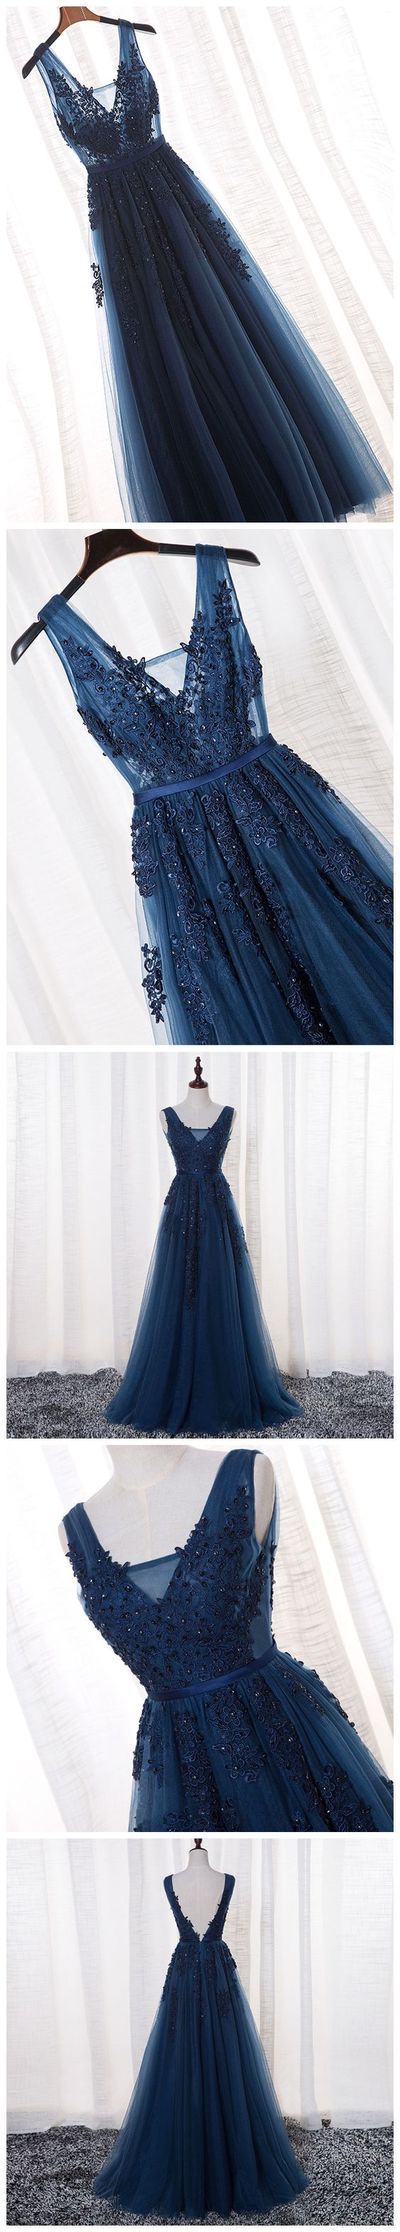 A-line V-neck Floor Length Tulle Prom Dress/evening Dress With Appliques,p3384